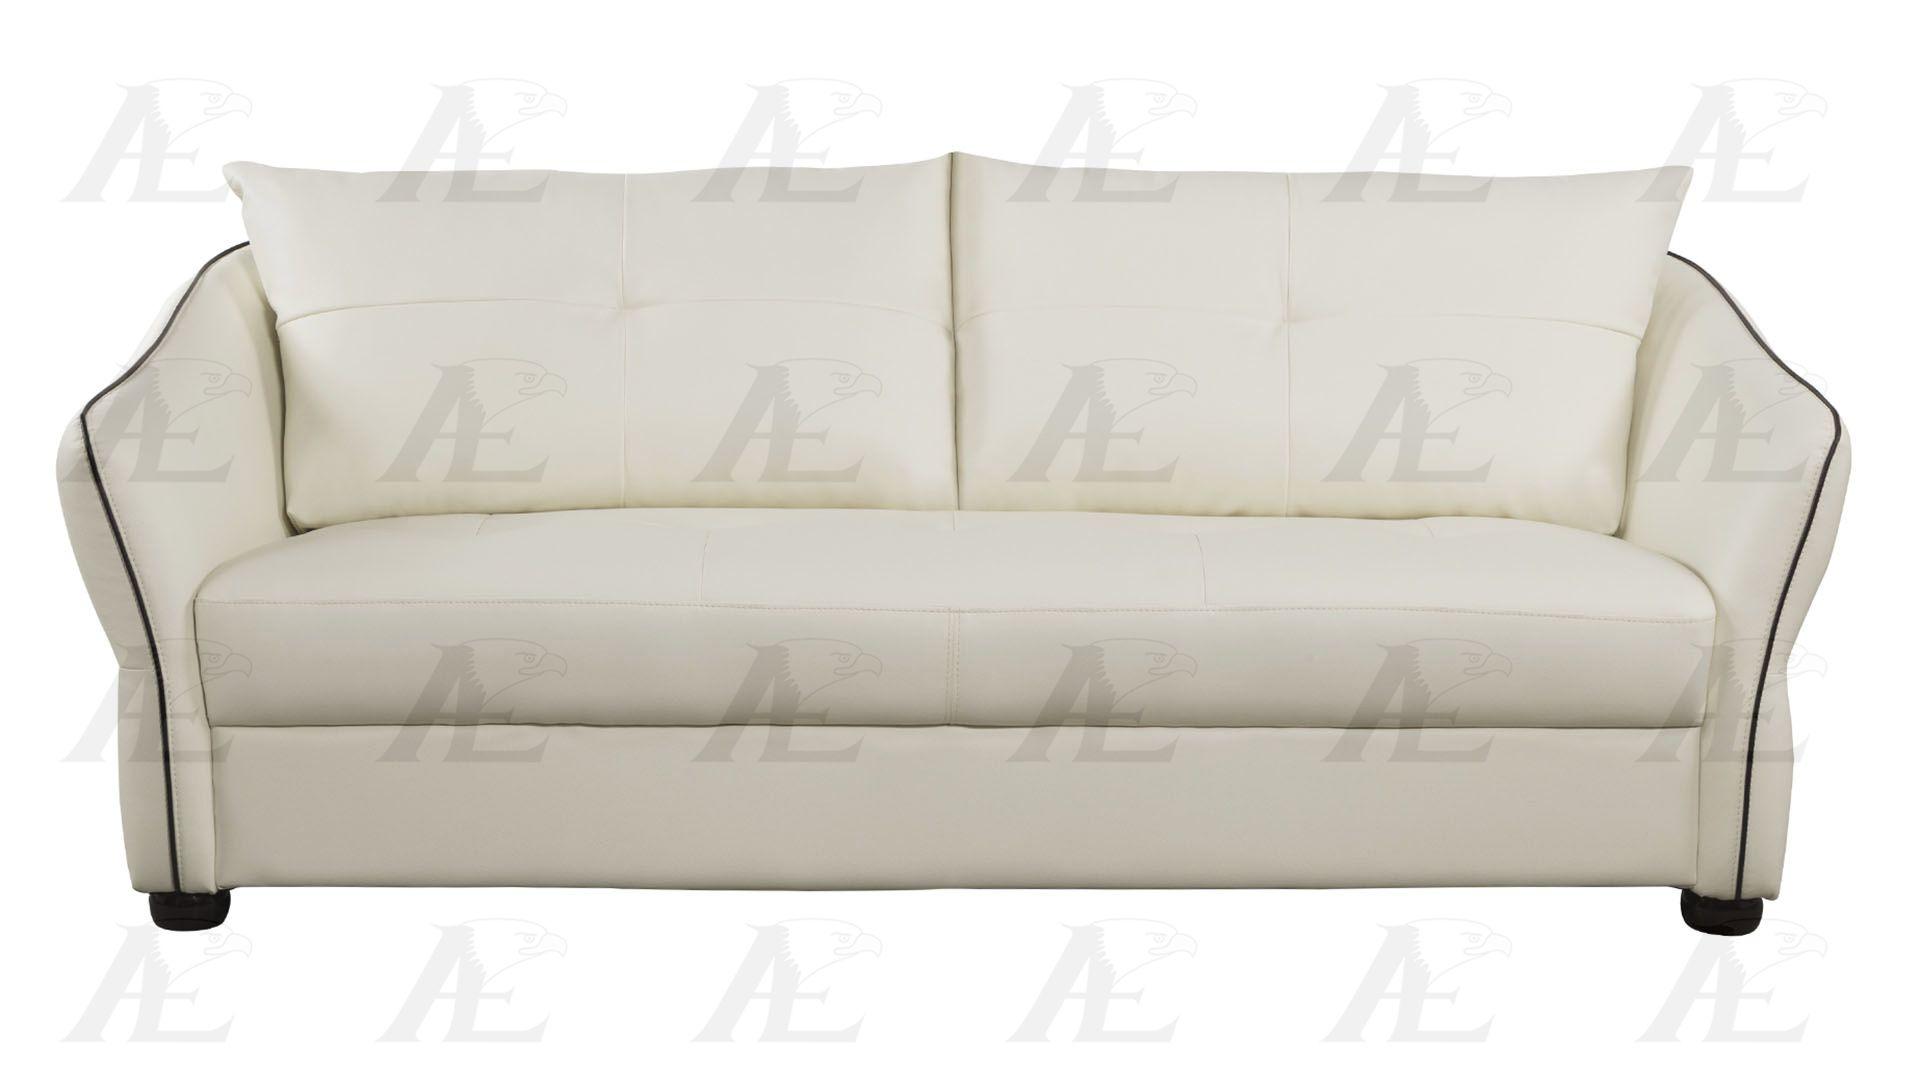 

    
Ivory Sofa Loveseat and Chair Faux Leather Set 3Pcs American Eagle AE348-IV
